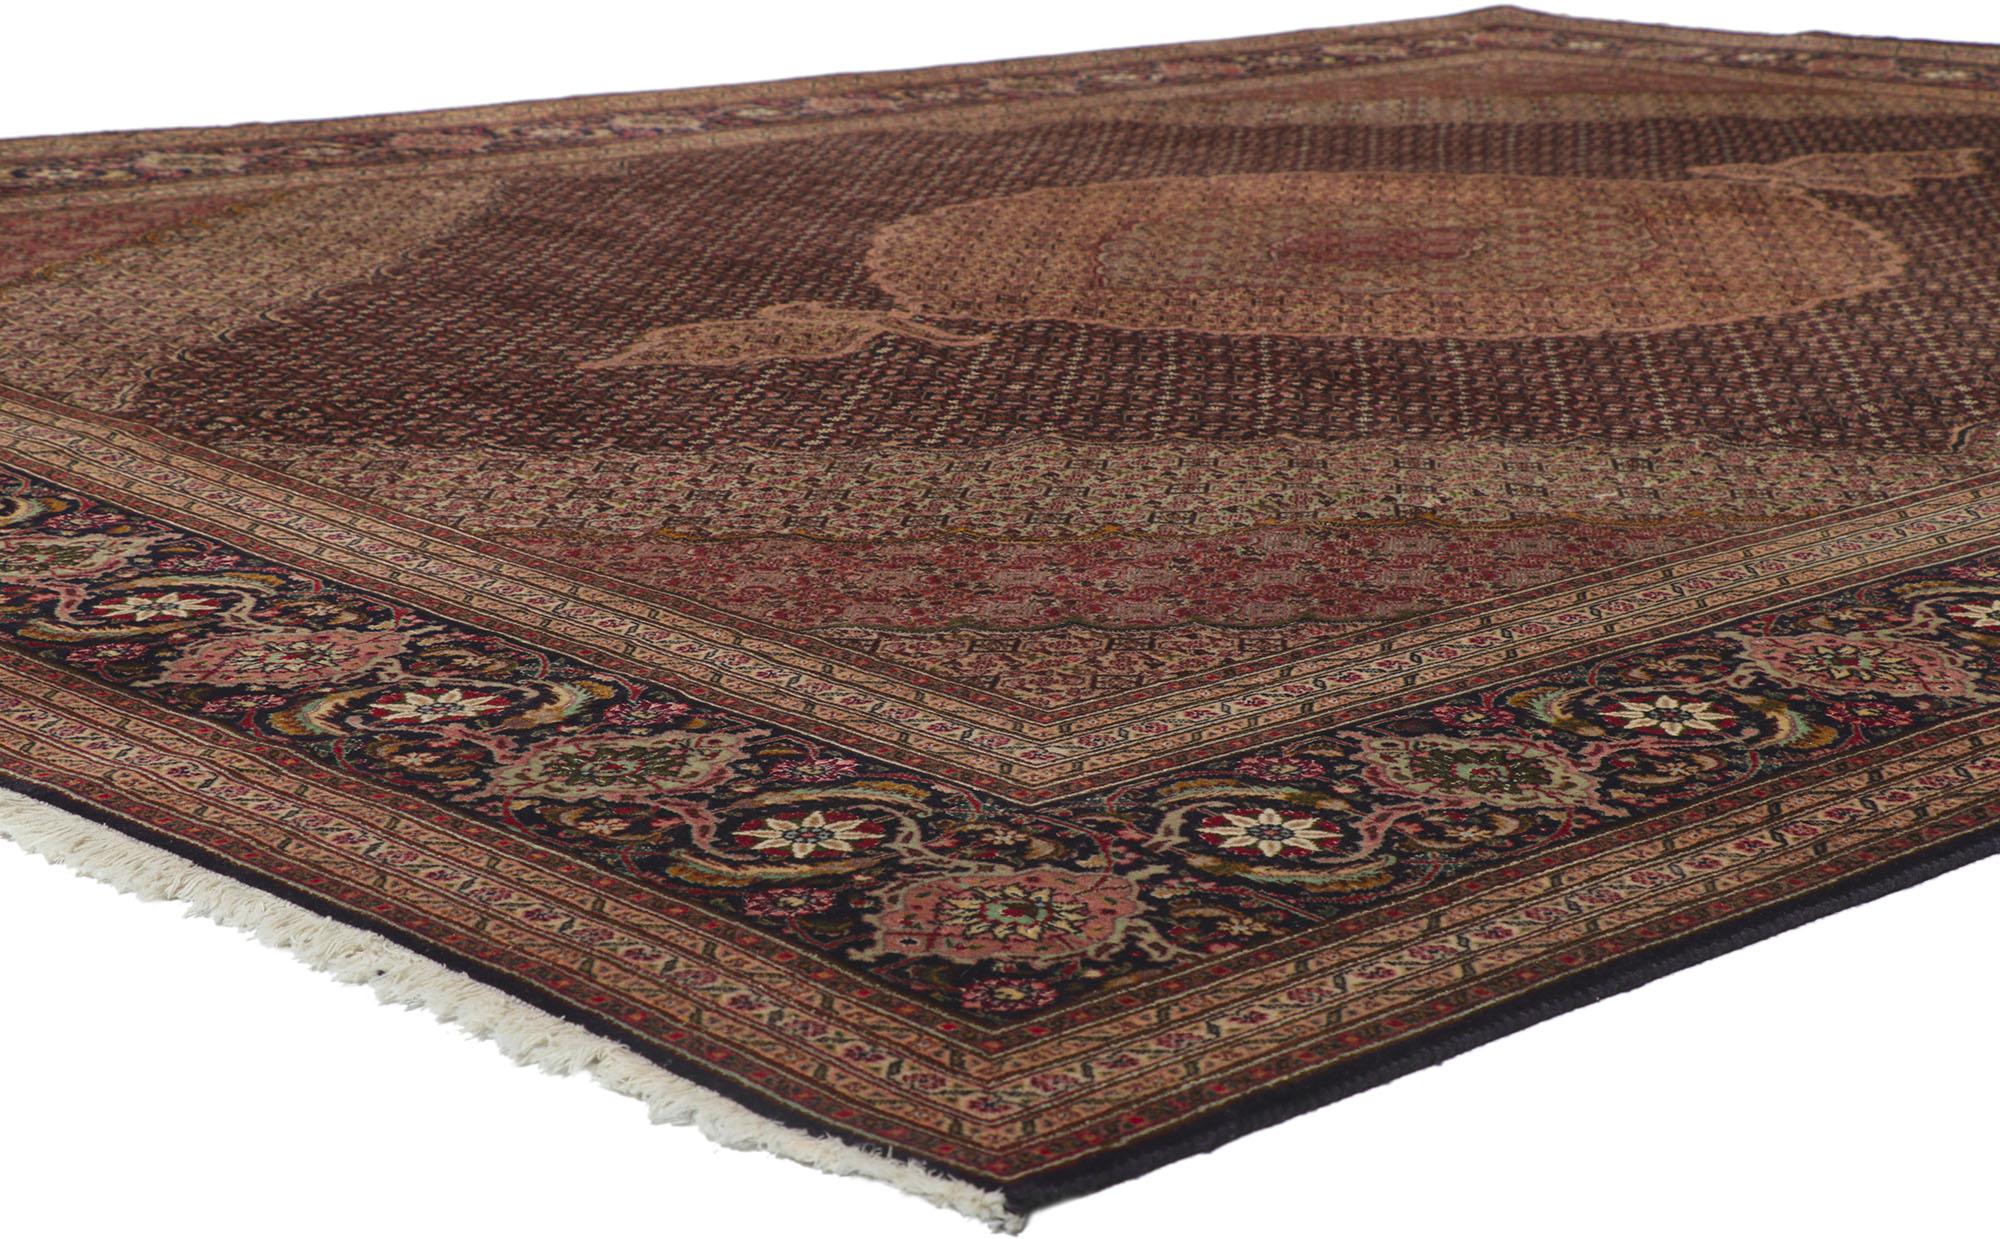 61005 Vintage Persian Mahi Tabriz rug, 09'11 x 12'08. With ornate details and well-balanced symmetry, this hand-knotted wool vintage Persian Mahi Tabriz rug is poised to impress. Taking center stage is a a cusped medallion anchored with palmette